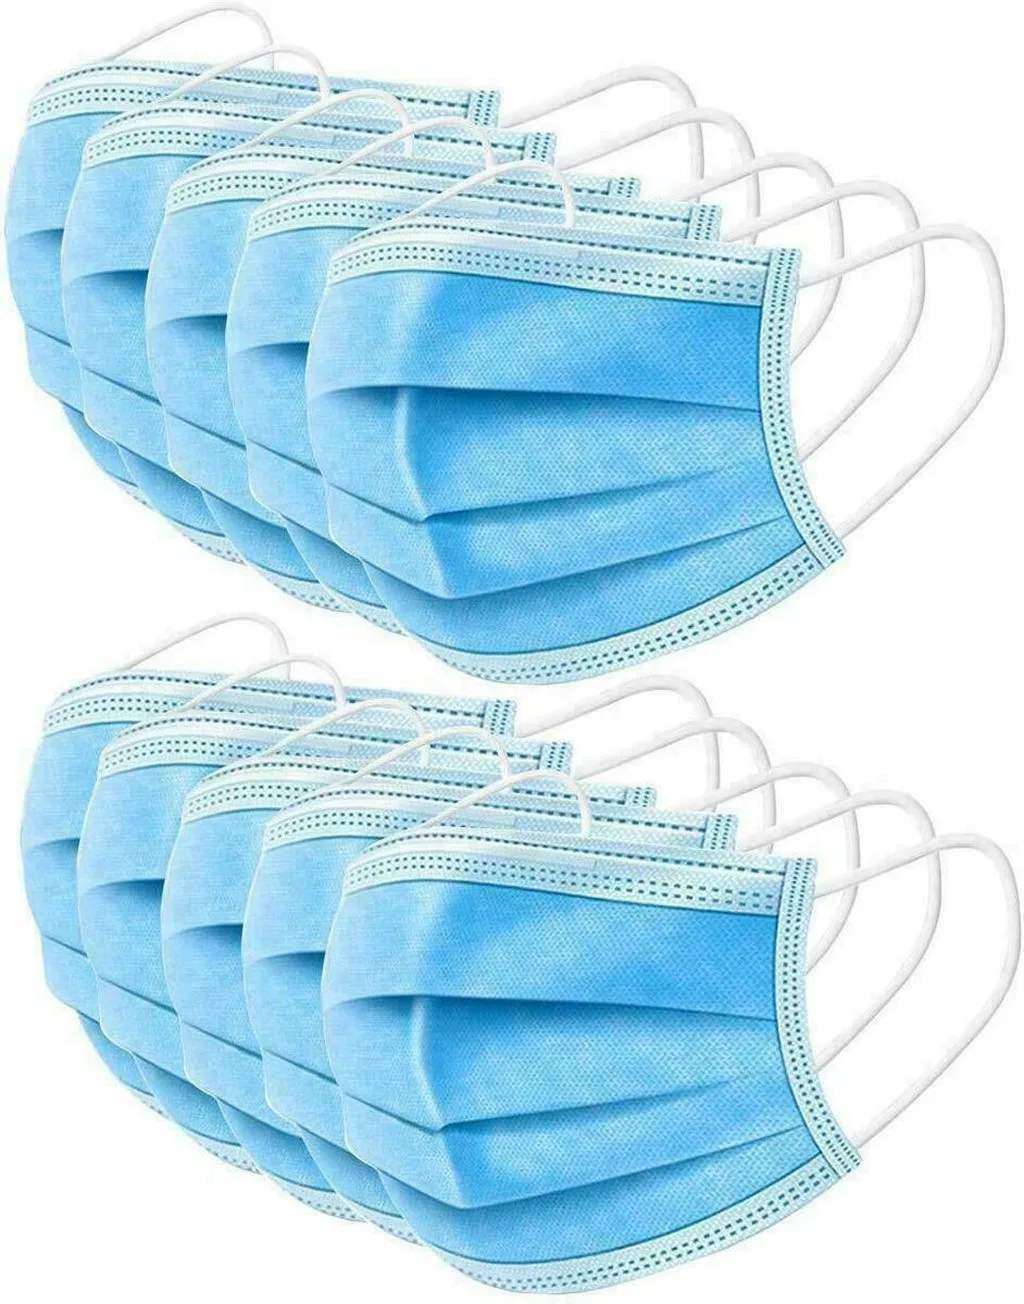 

50 PCS Disposable Sanitary Mask 3-Plys Nonwoven Dust Mask spray particles Breathable Earloop face Mask Mascarilla masque